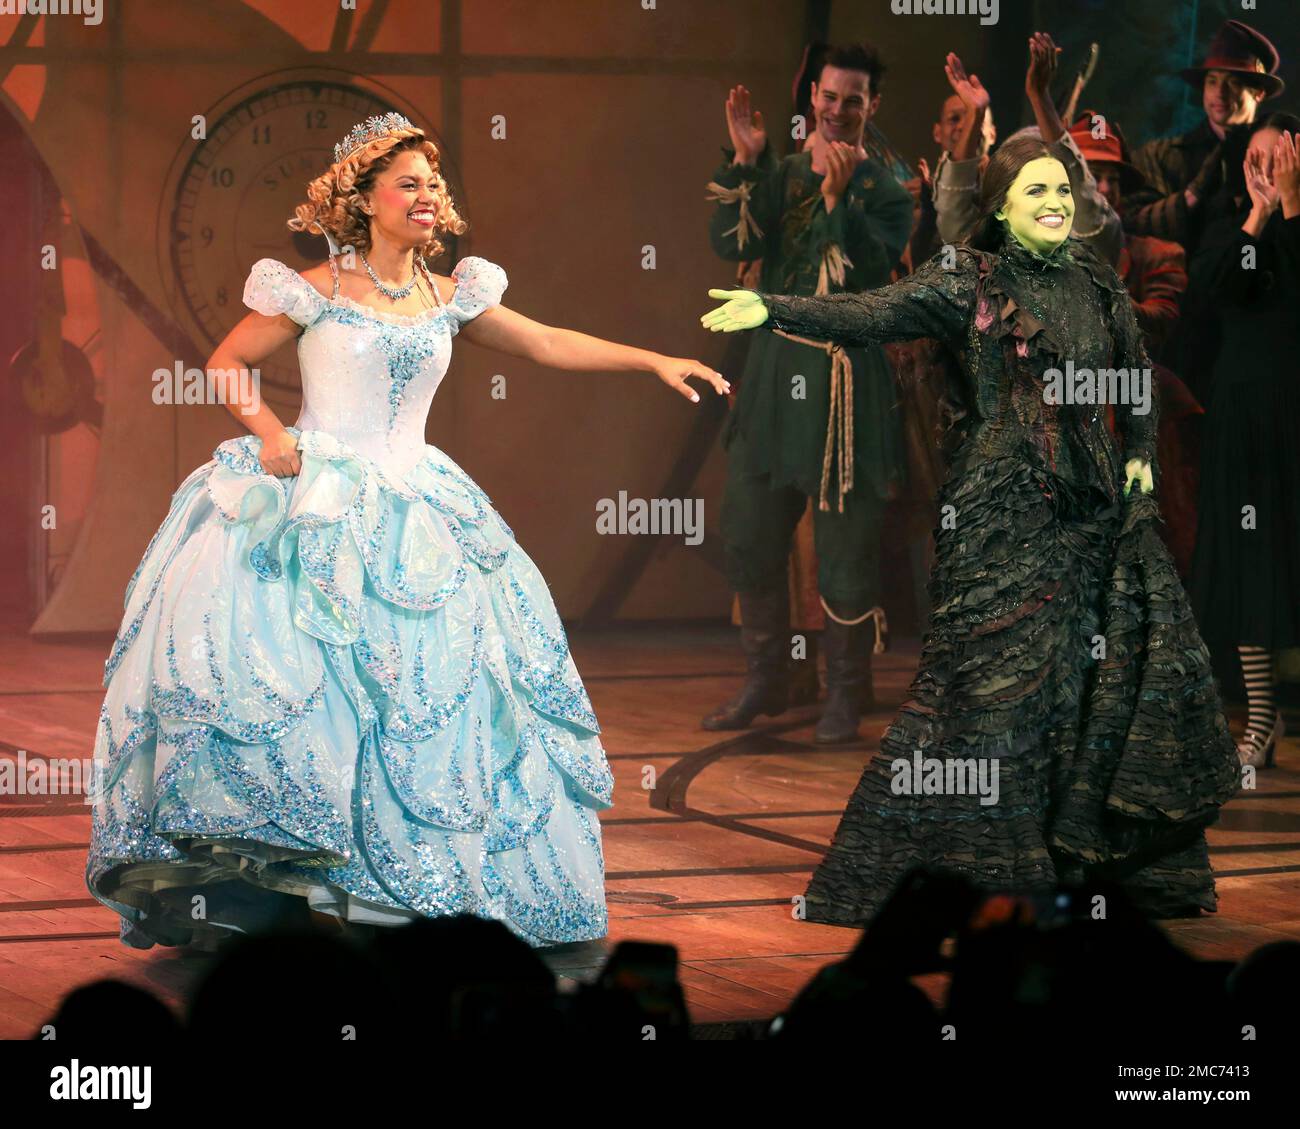 Actors Brittney Johnson, left, and Lindsay Pearce appear on stage during  the curtain call of the musical "Wicked" at the Gershwin Theatre on Monday,  Feb. 14, 2022, in New York. (Photo by